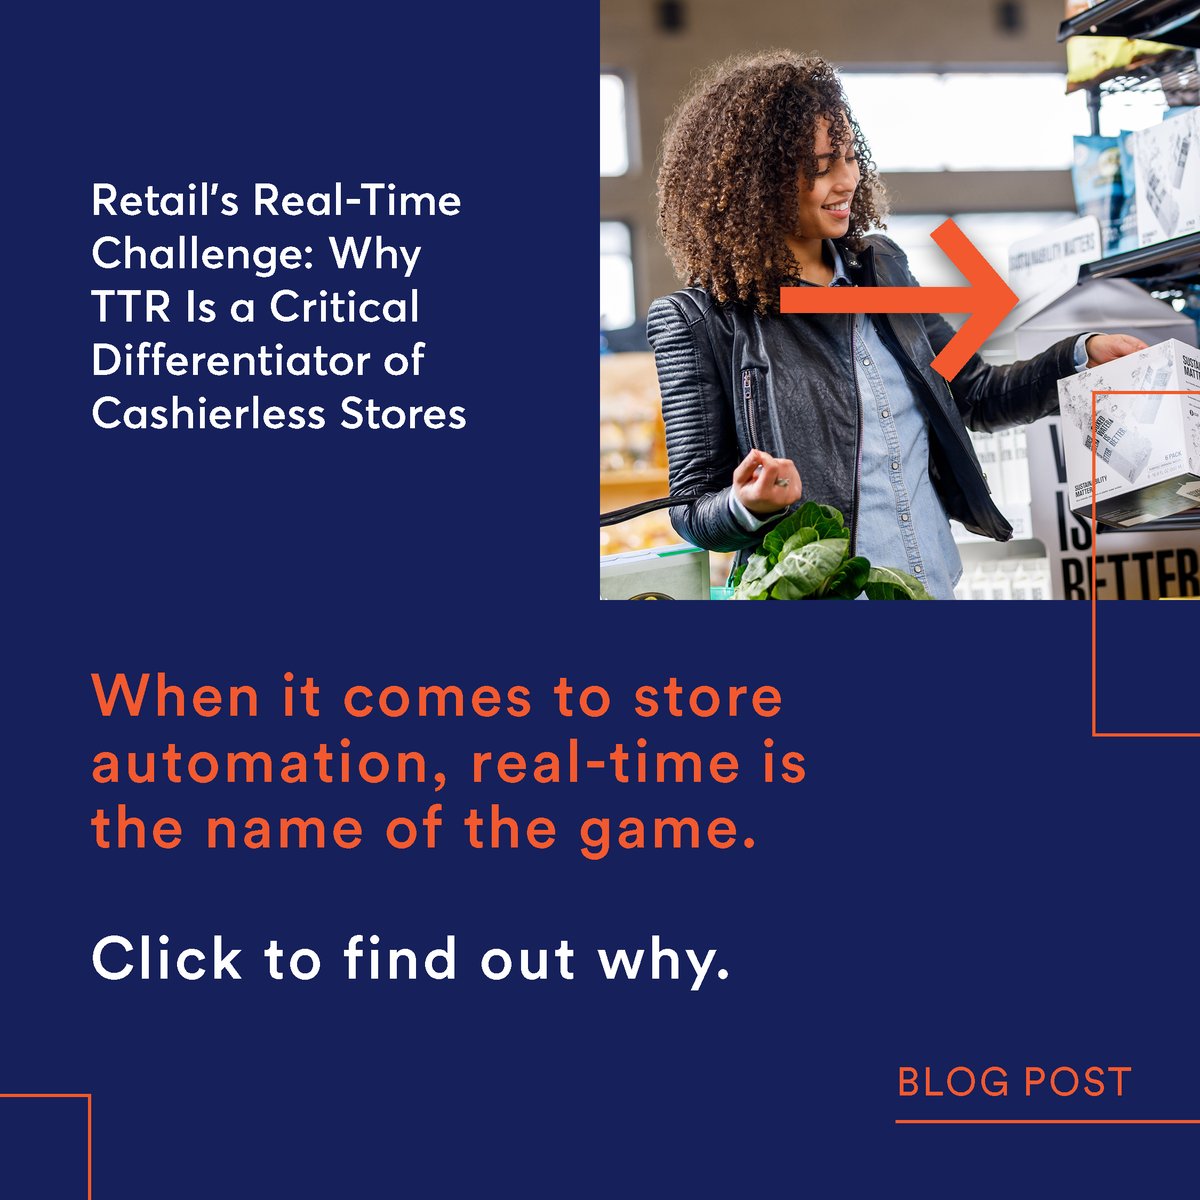 So why is TTR the holy grail of cashierless technology? In one word: trust. Click to discover all about Trigo’s EasyOut: bit.ly/3DYjWNh #Trigo #retailinnovation #futurestore #cashierlesstechnology #realtimereceipt